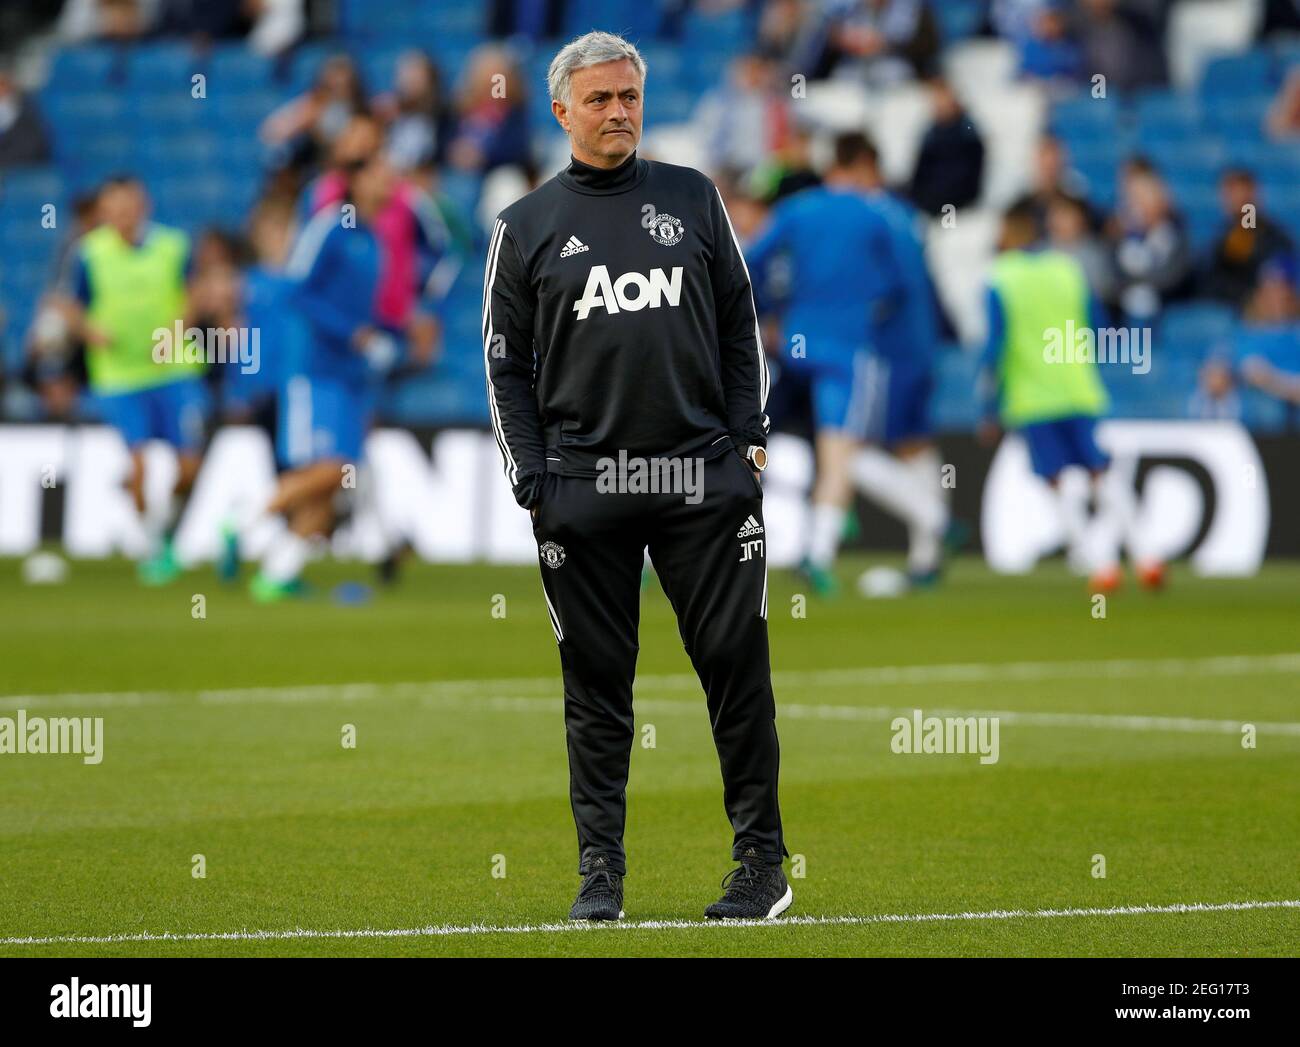 Soccer Football - Premier League - Brighton & Hove Albion v Manchester United - The American Express Community Stadium, Brighton, Britain - May 4, 2018   Manchester United manager Jose Mourinho during the warm up before the match    Action Images via Reuters/Paul Childs    EDITORIAL USE ONLY. No use with unauthorized audio, video, data, fixture lists, club/league logos or 'live' services. Online in-match use limited to 75 images, no video emulation. No use in betting, games or single club/league/player publications.  Please contact your account representative for further details. Stock Photo